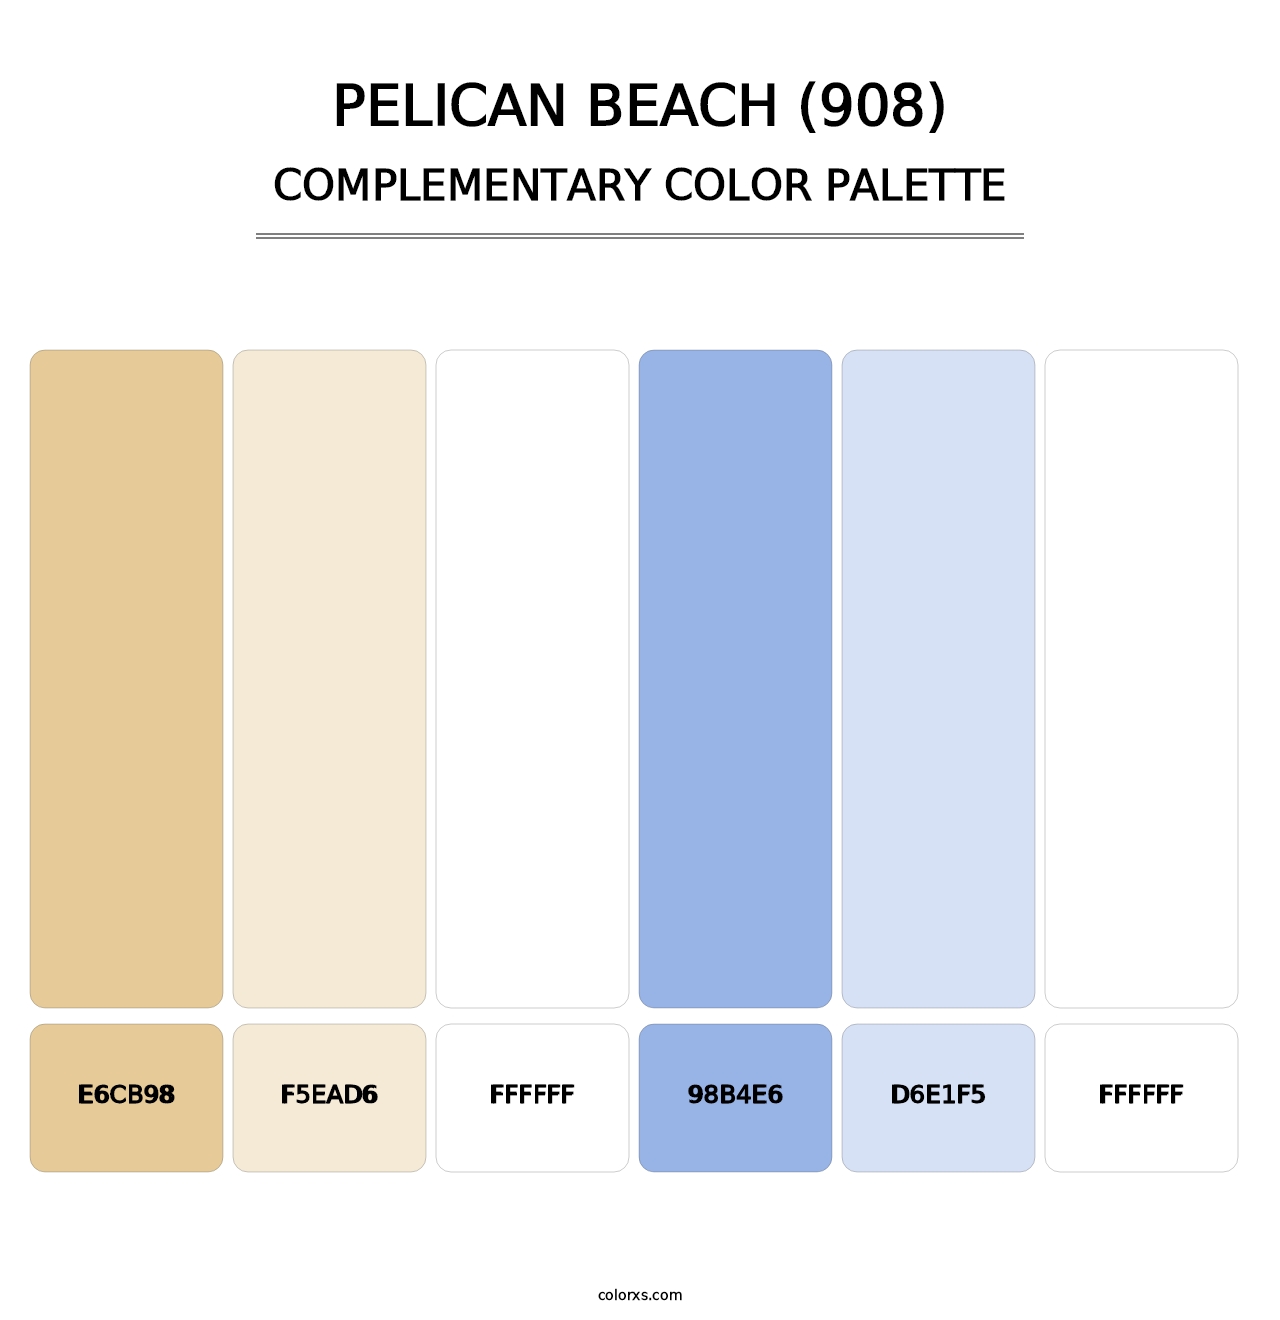 Pelican Beach (908) - Complementary Color Palette